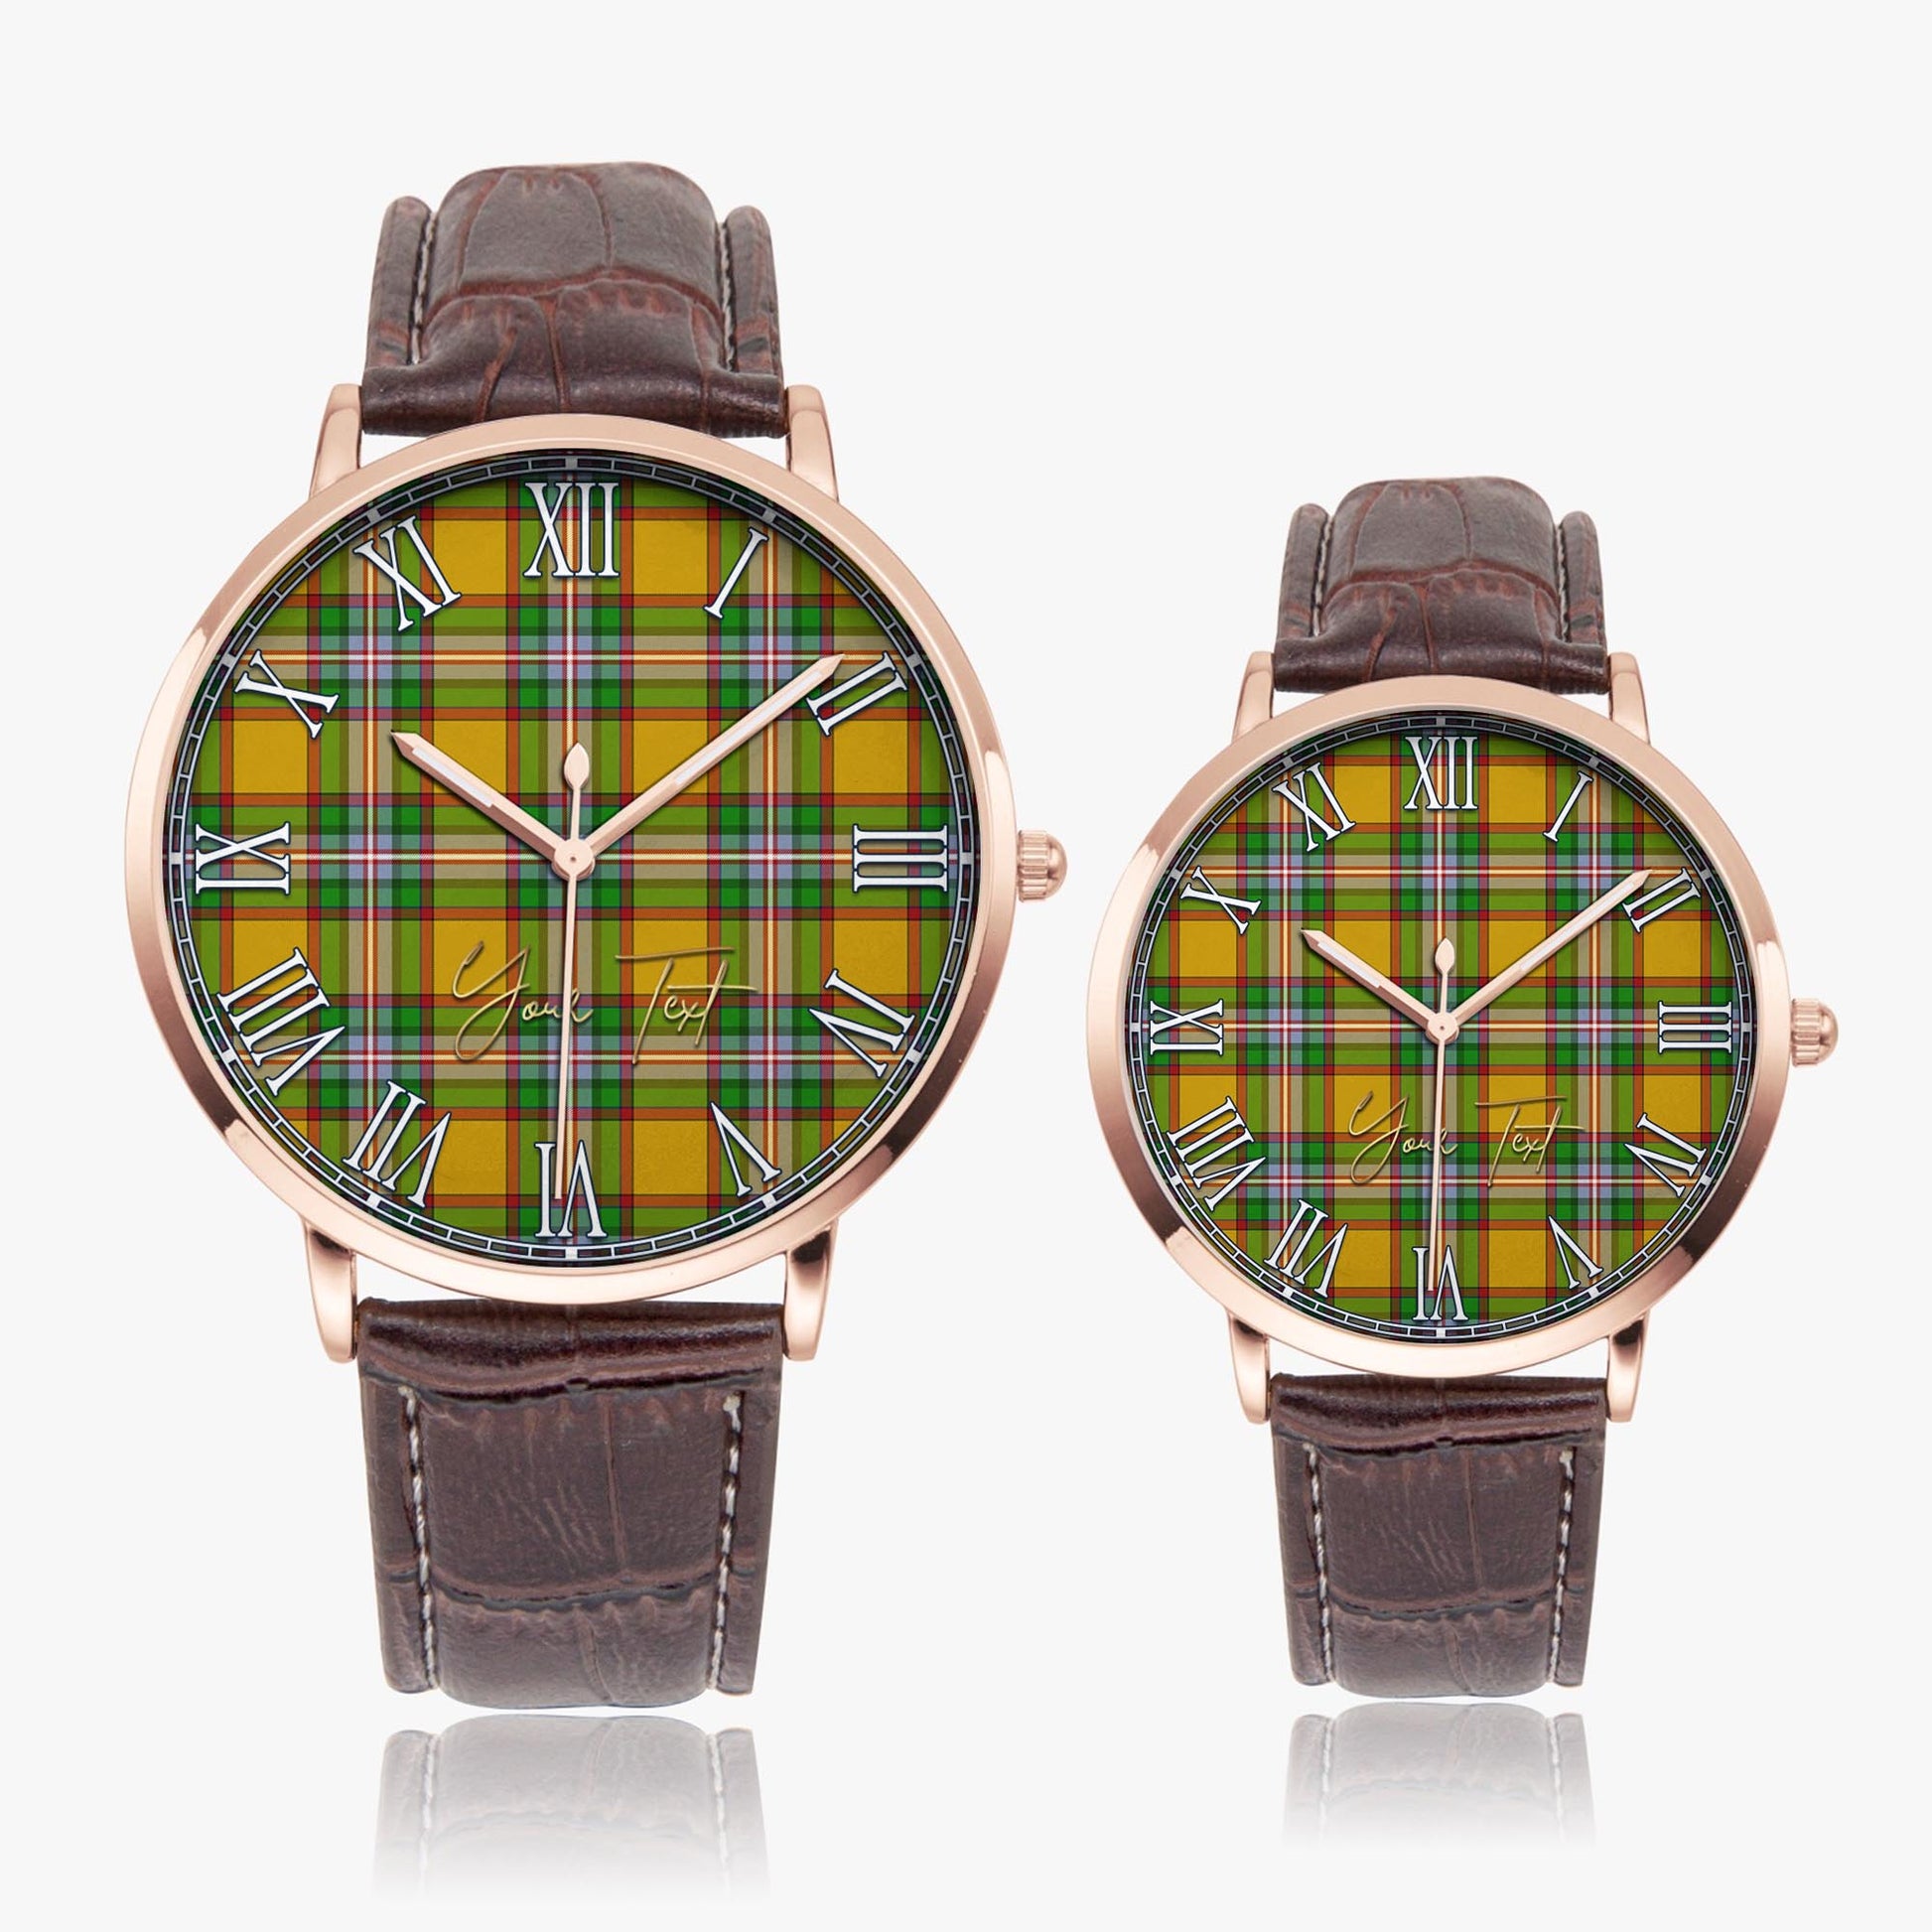 Essex County Canada Tartan Personalized Your Text Leather Trap Quartz Watch Ultra Thin Rose Gold Case With Brown Leather Strap - Tartanvibesclothing